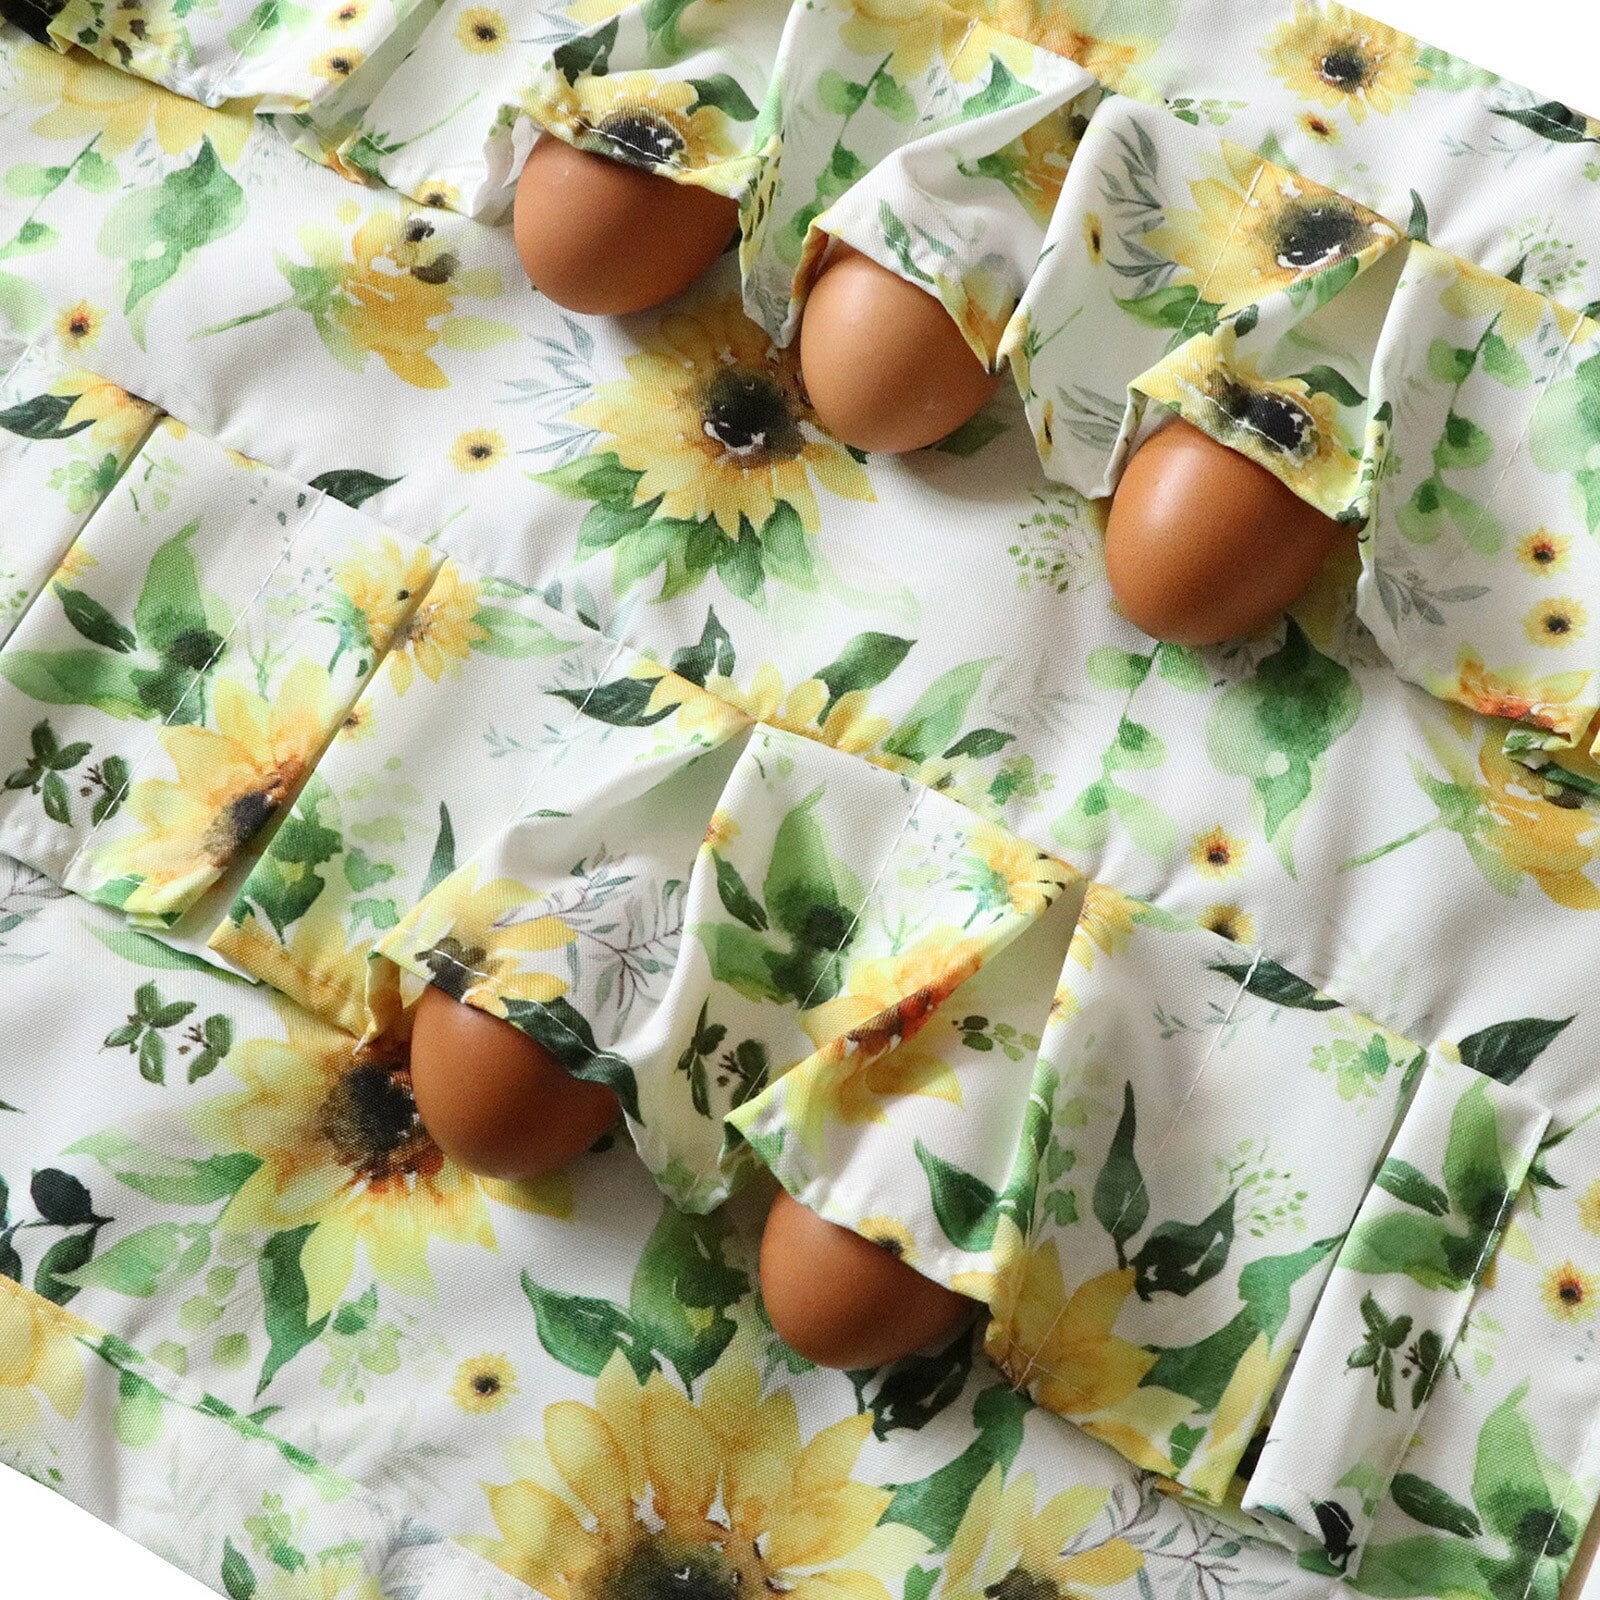 2 Pack Egg Apron,Egg Collecting Apron For Chicken Duck Goose Eggs